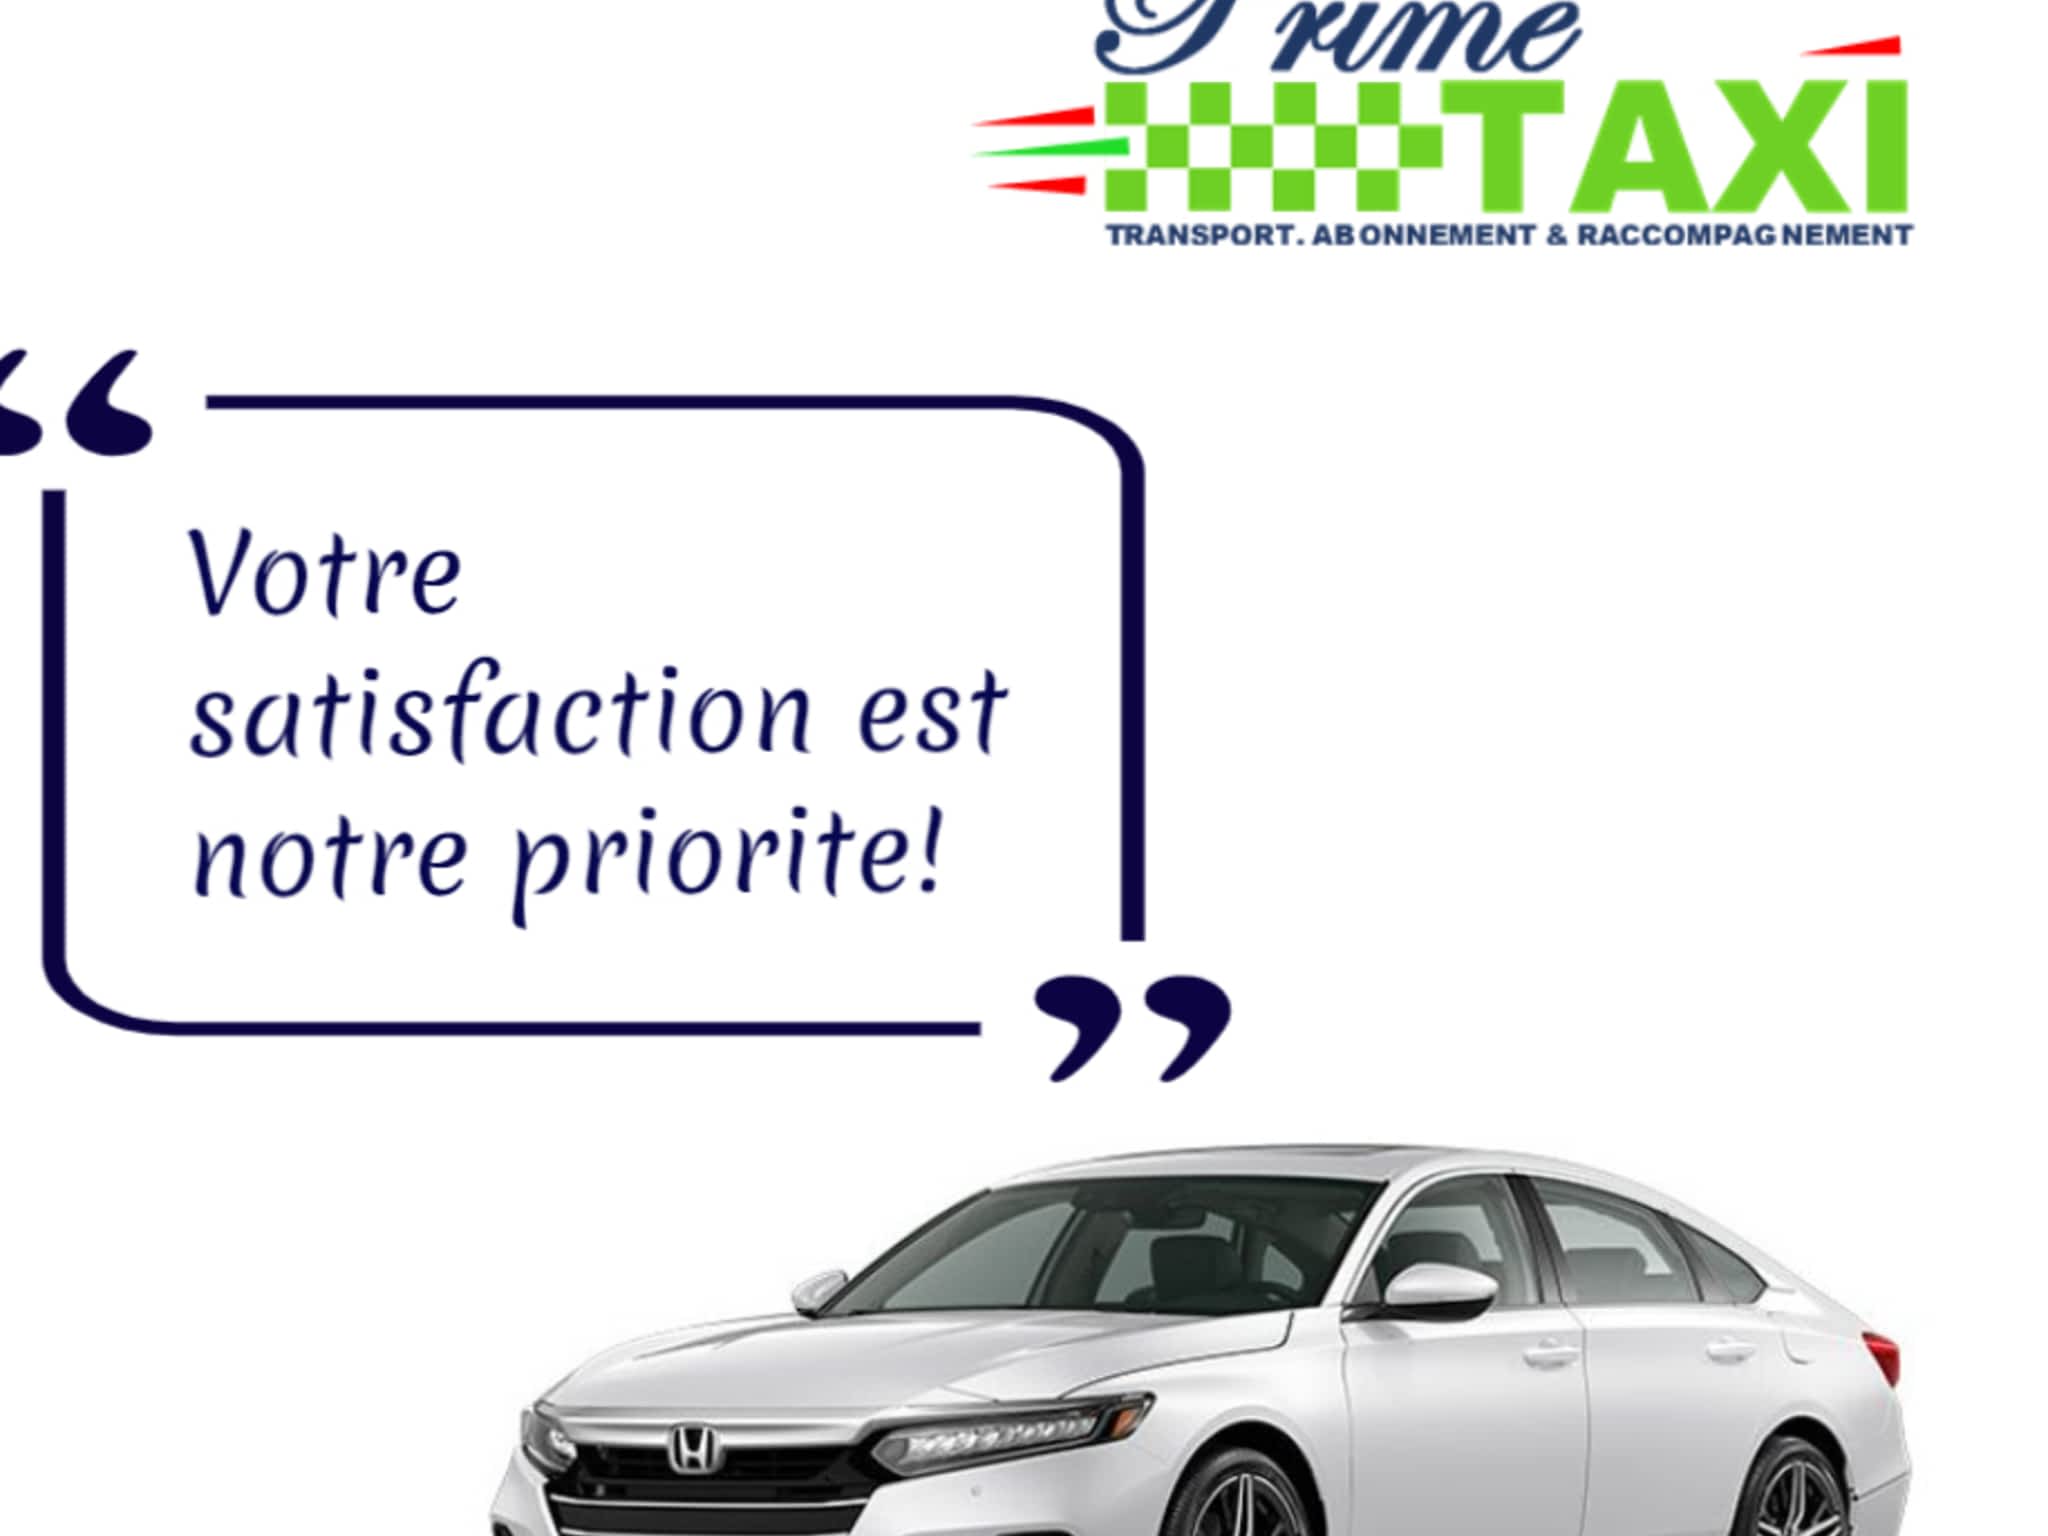 photo Prime Taxi Transport et Raccompagnement